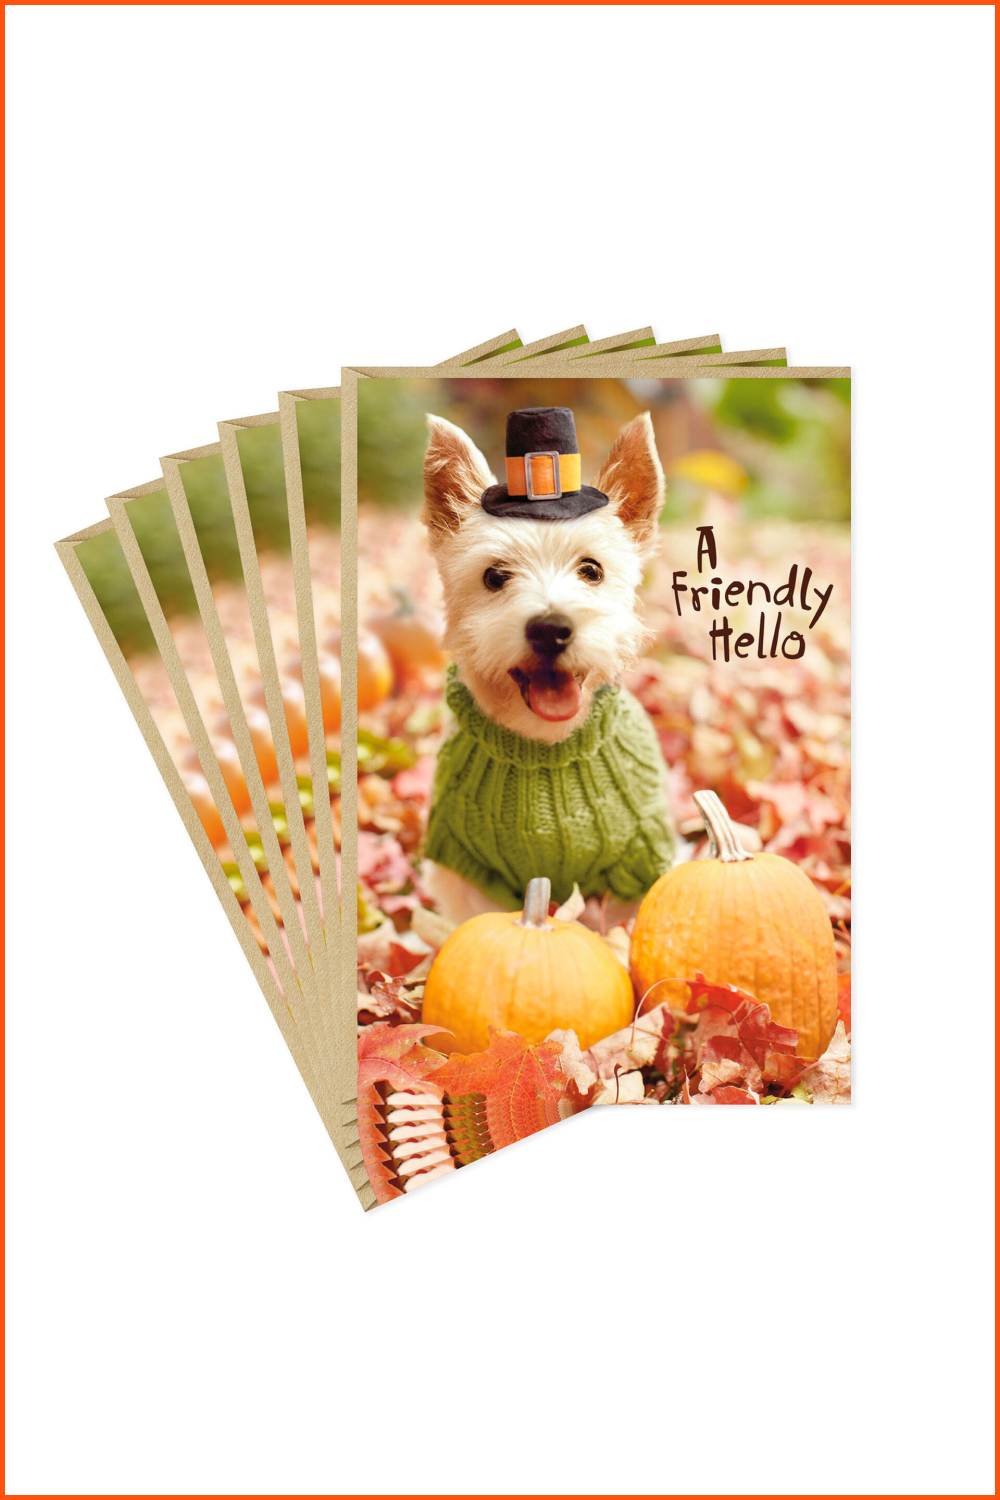 Postcard with a white dog in a green sweater and a top hat next to orange pumpkins.